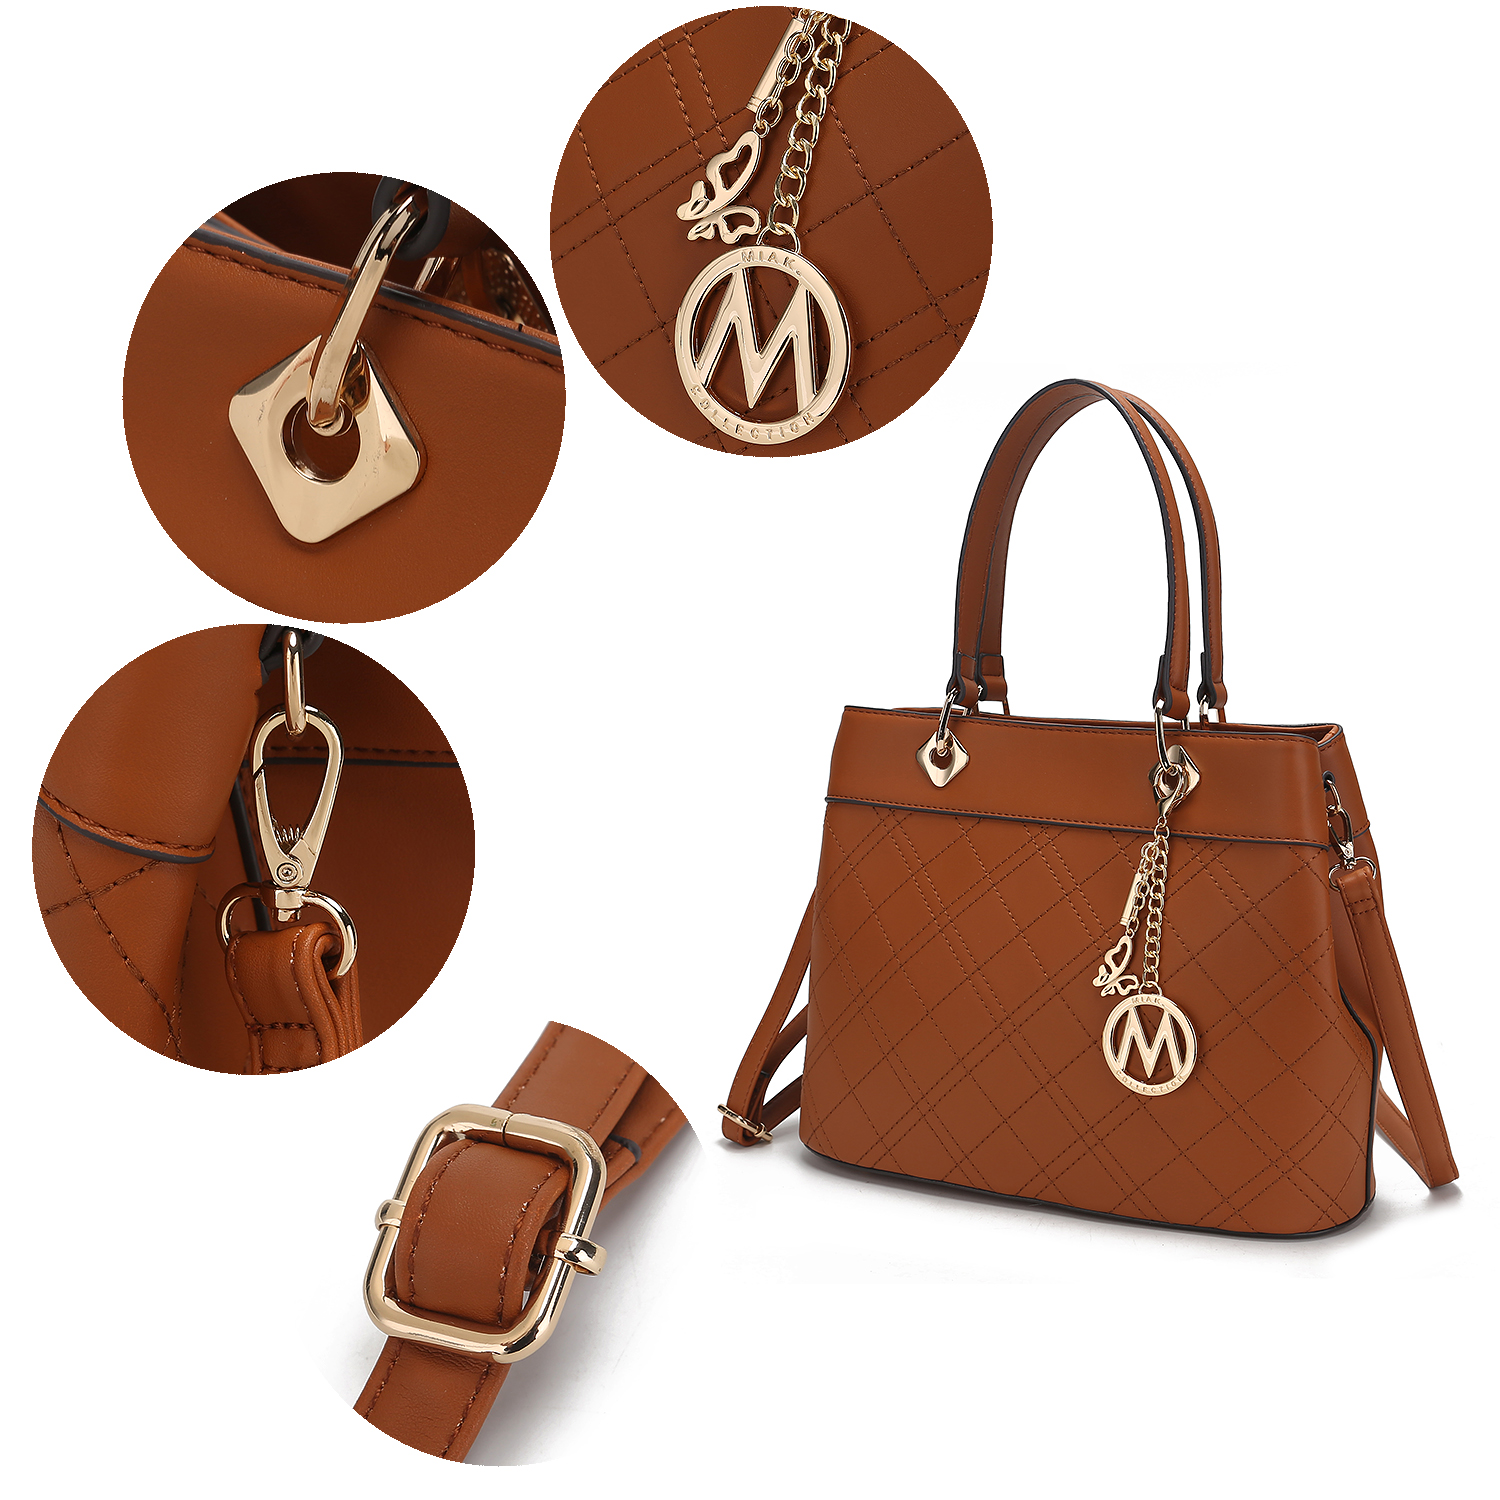 MKF Collection by Mia K. Fantasia Satchel Bag - image 5 of 5